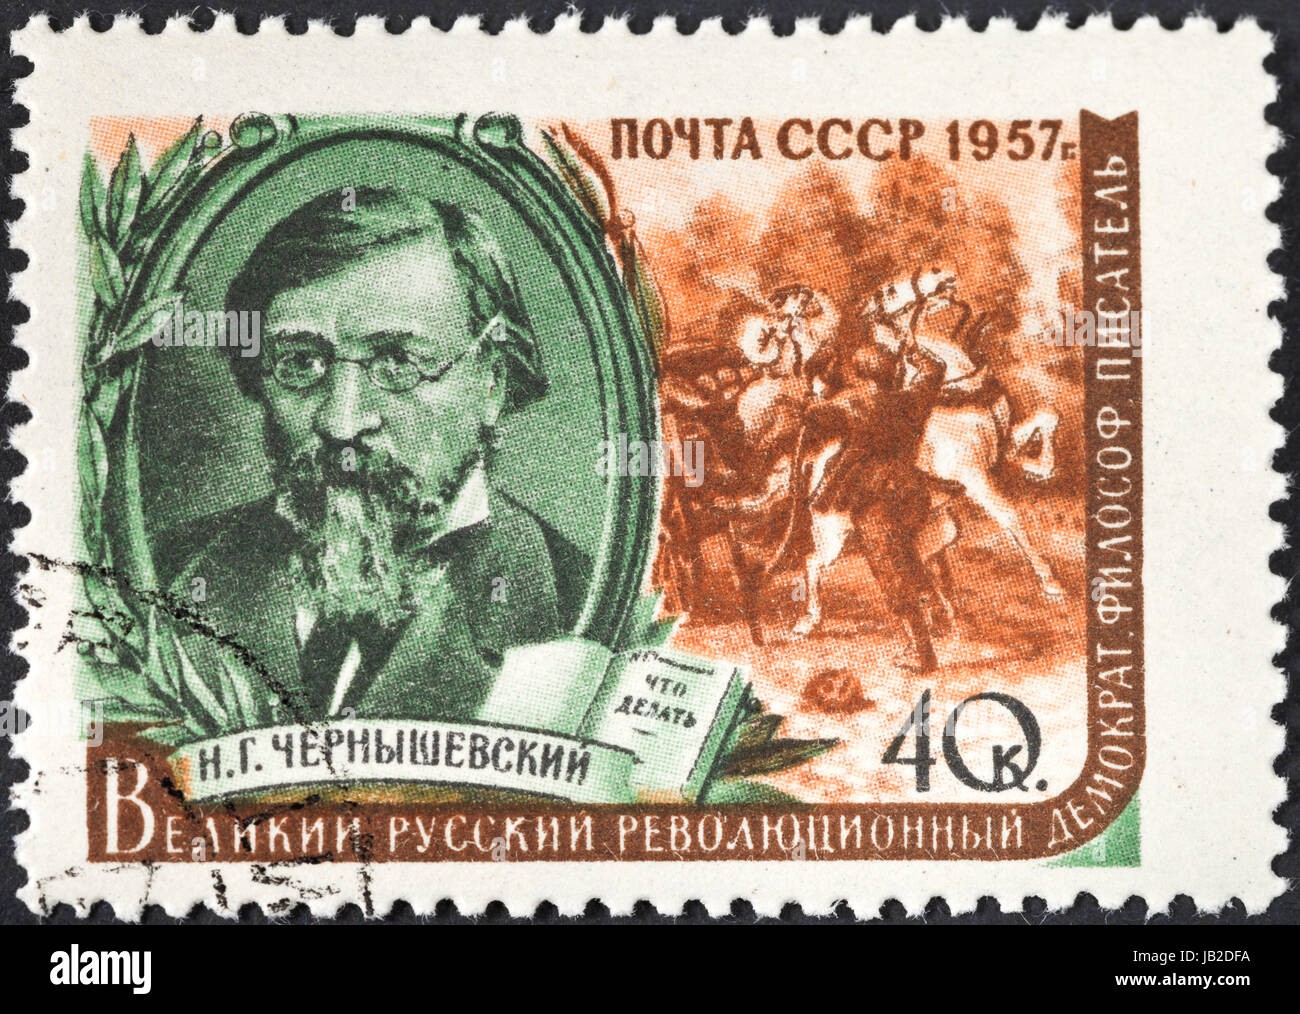 USSR - CIRCA 1957: A postage stamp printed in the USSR shows portrait of famous russian writer Chernyshevsky, circa 1957 Stock Photo